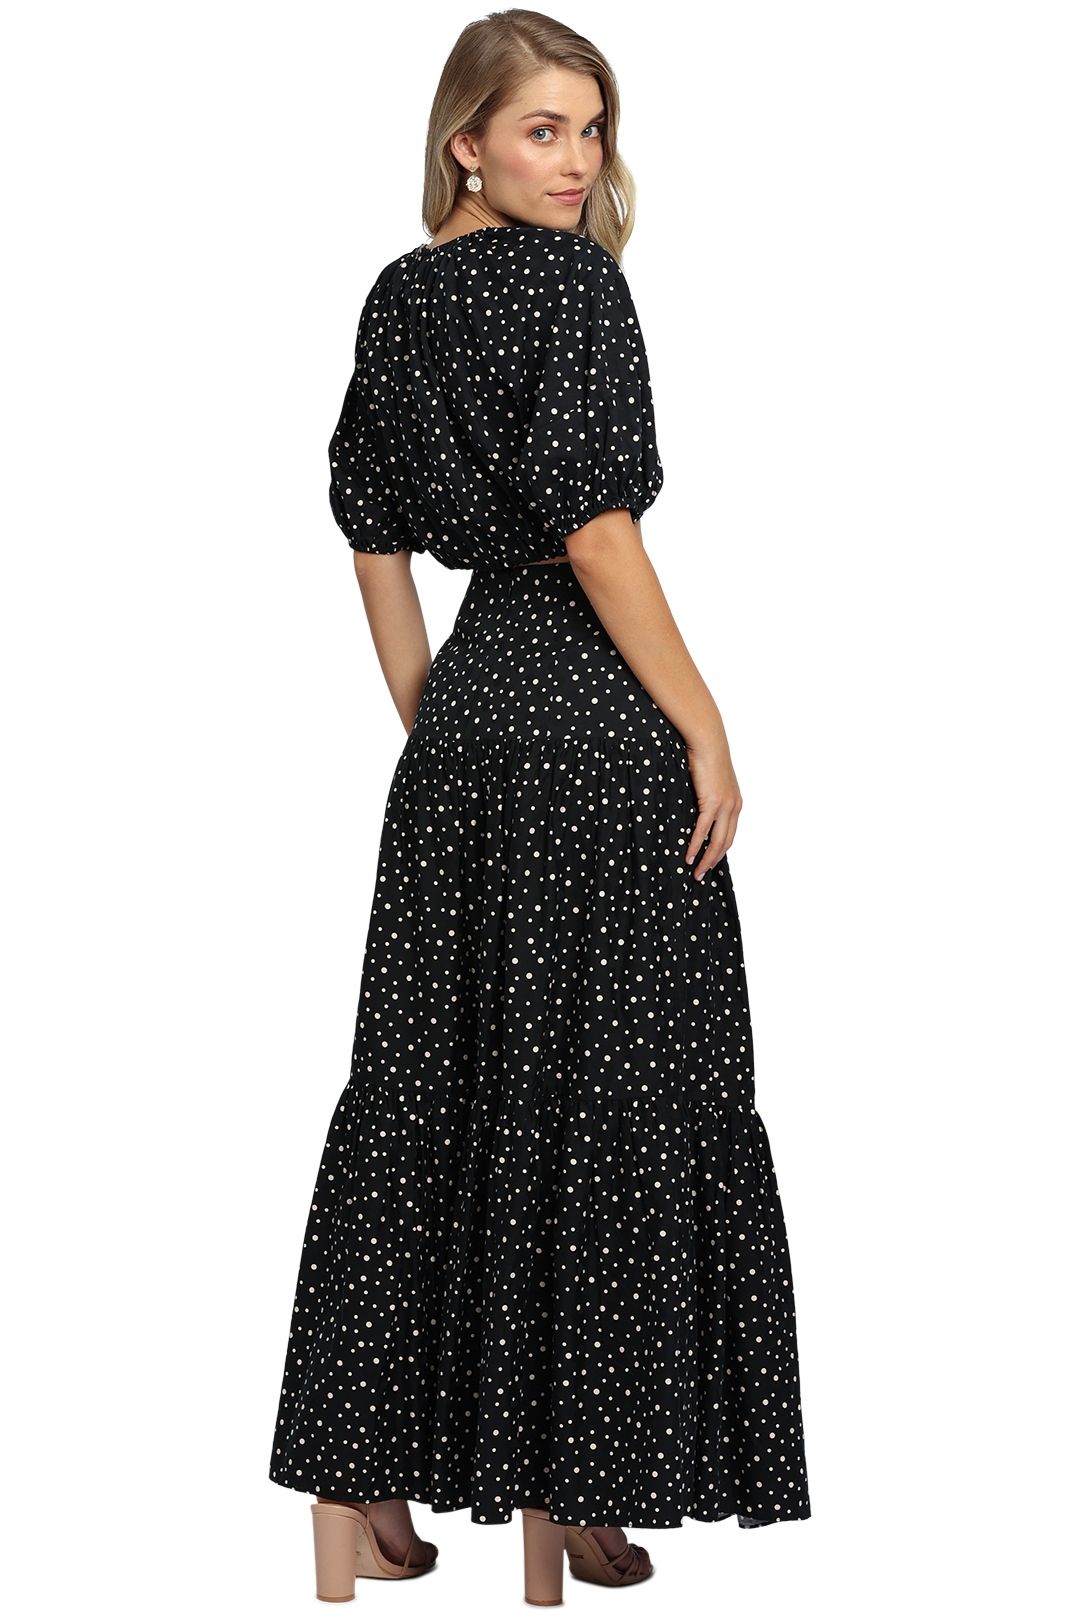 Significant Other Poppy Top and Skirt Set Black Cream Polka print